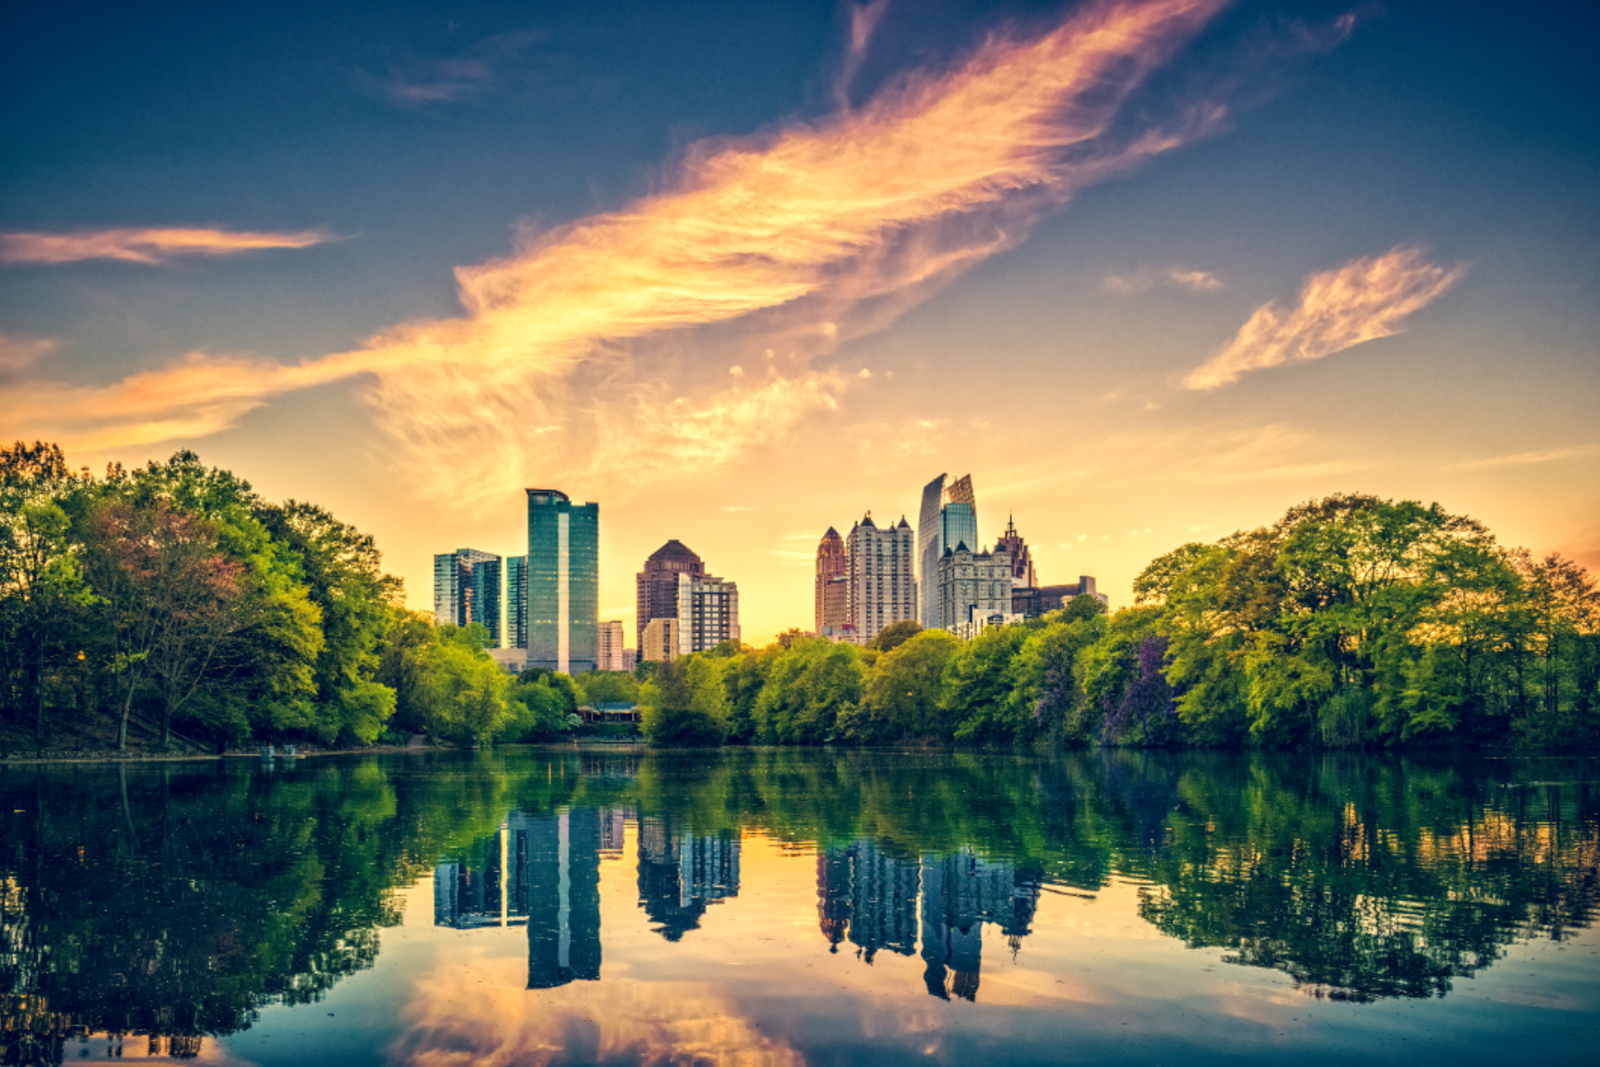 Atlanta is a historically and culturally rich destination for solo travellers to explore in the US